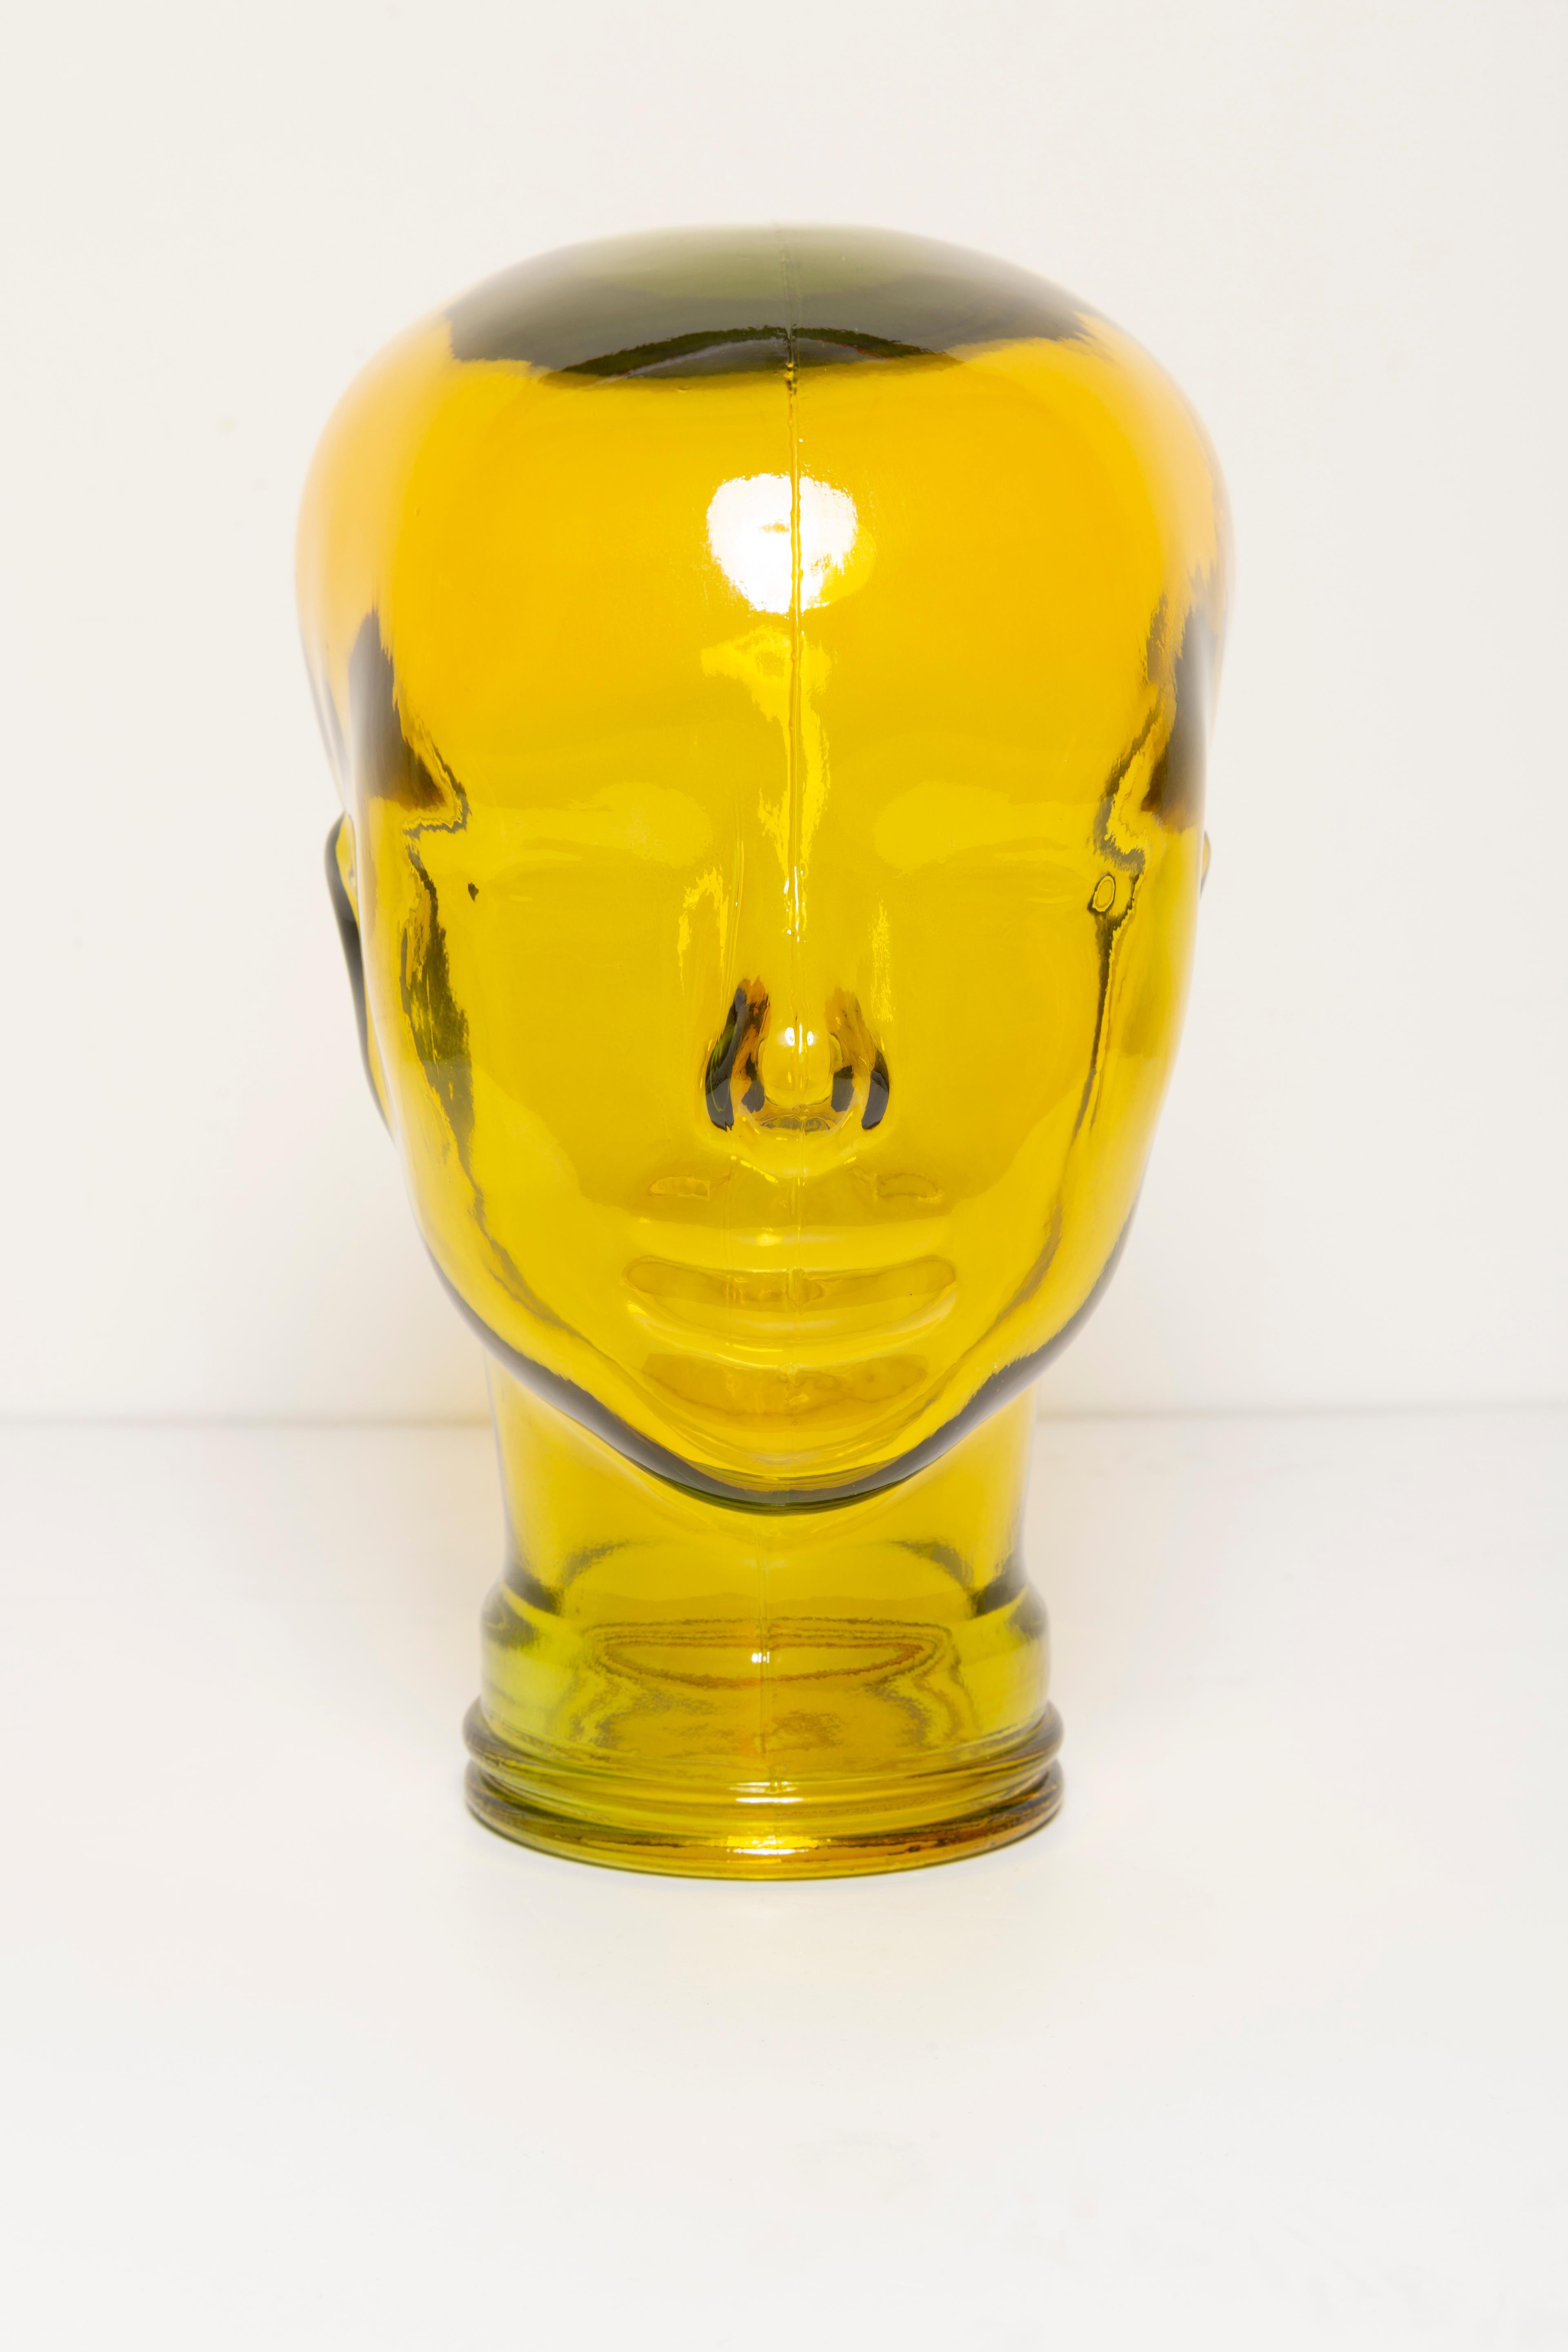 Life-size glass head in a unique yellow color. Produced in a German steelworks in the 1970s. Perfect condition. A perfect addition to the interior, photo prop, display or headphone stand.